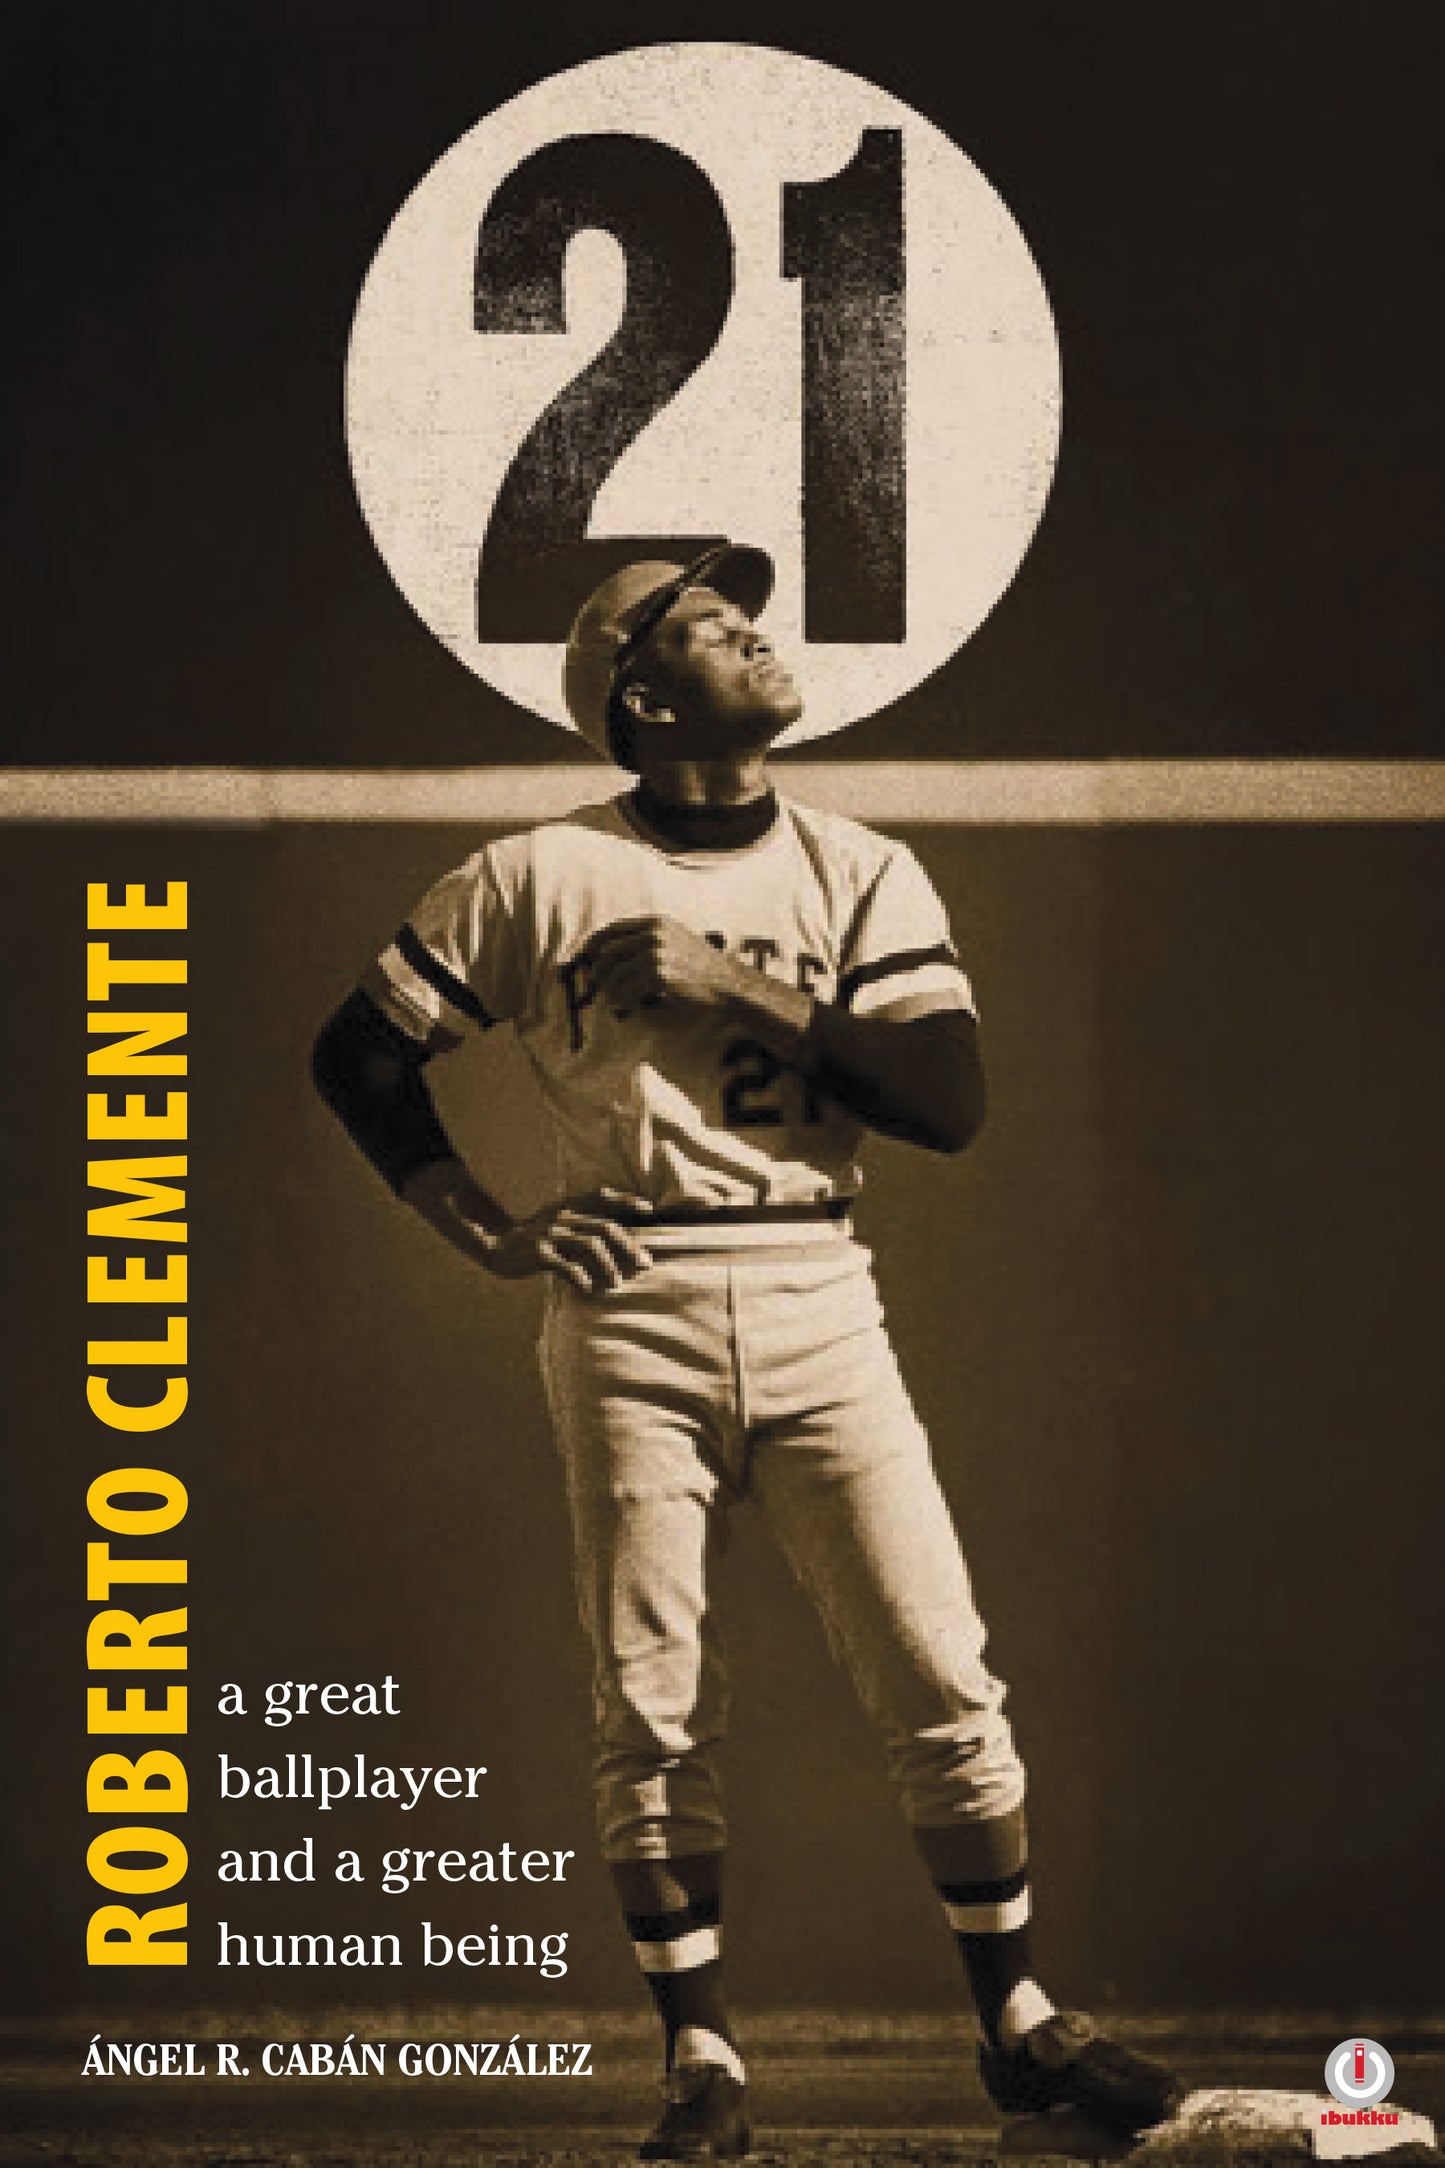 Roberto Clemente: A great ballplayer and a greater human being